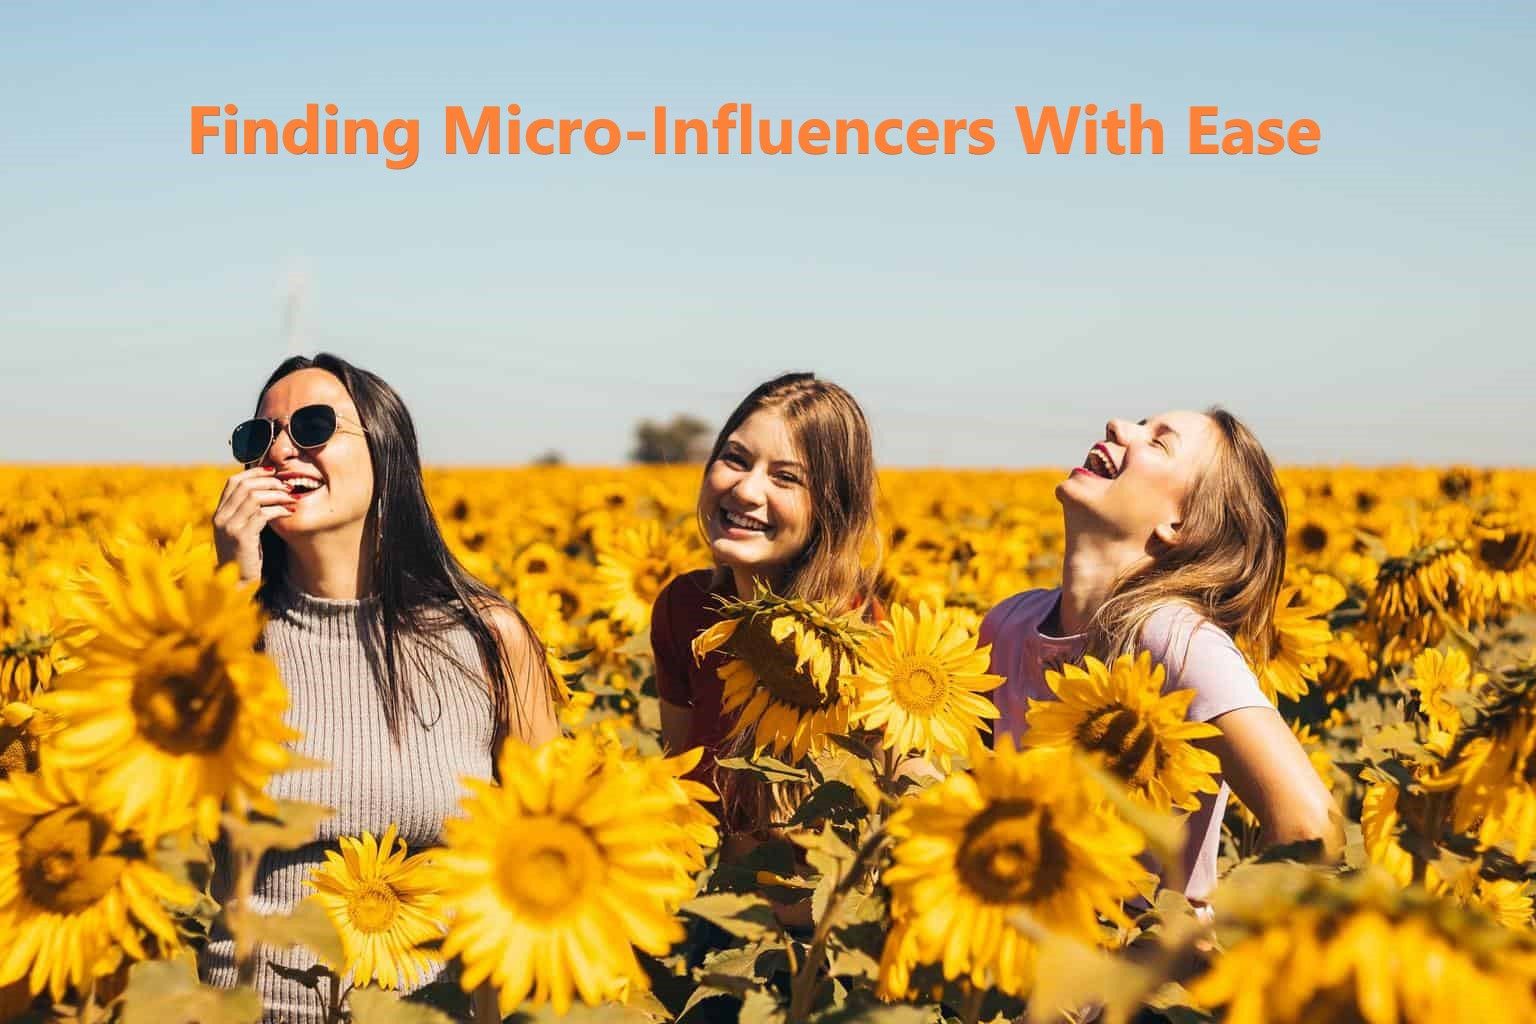 How Brands Can Find Micro-Influencers with Ease? A Step-byStep Guide